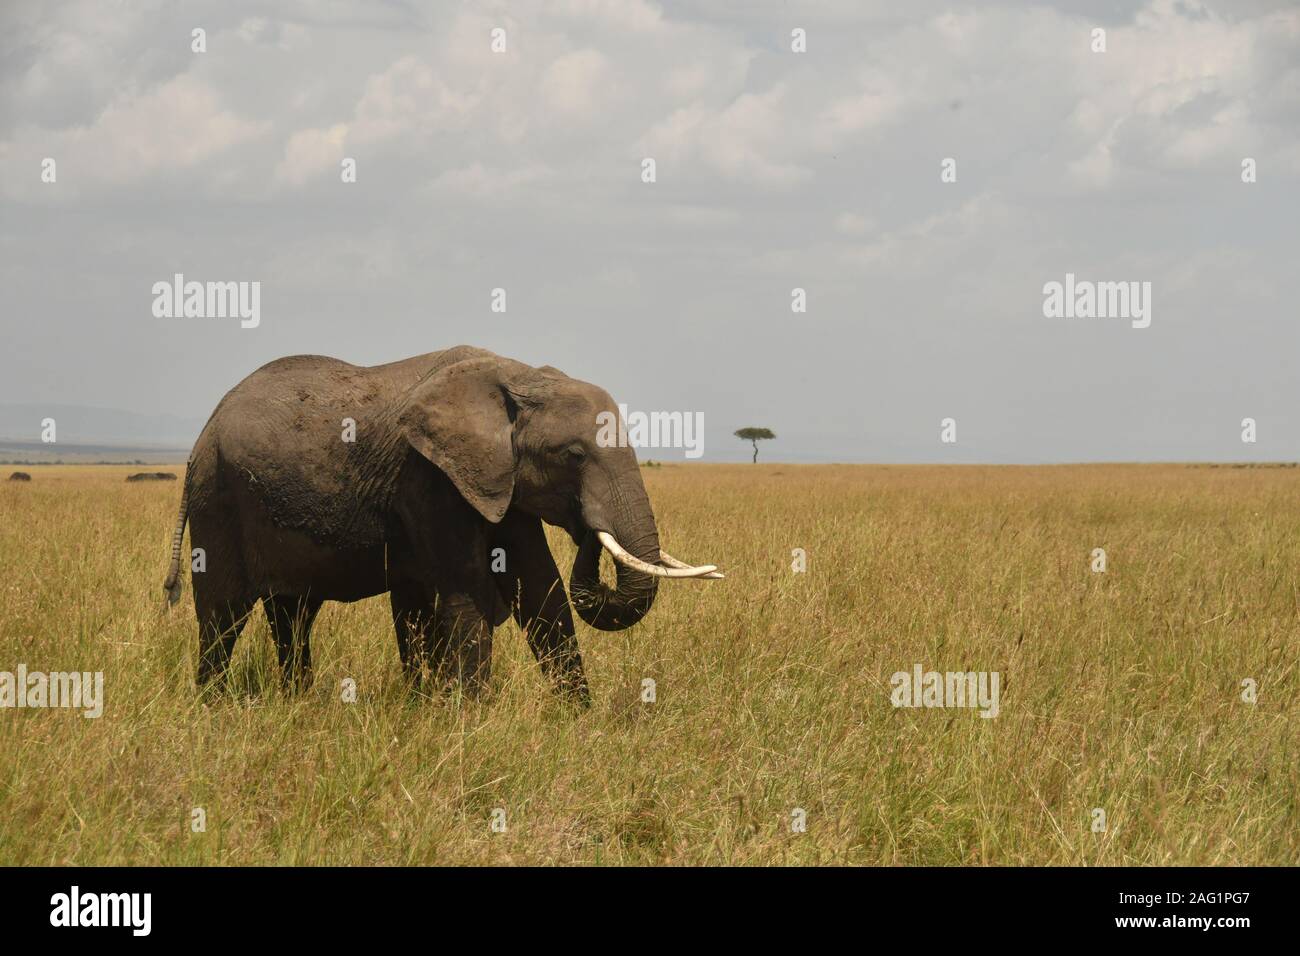 An elephant using its trunk to lift grass into its mouth to eat. A lonely Acacia tree in the distant background Stock Photo